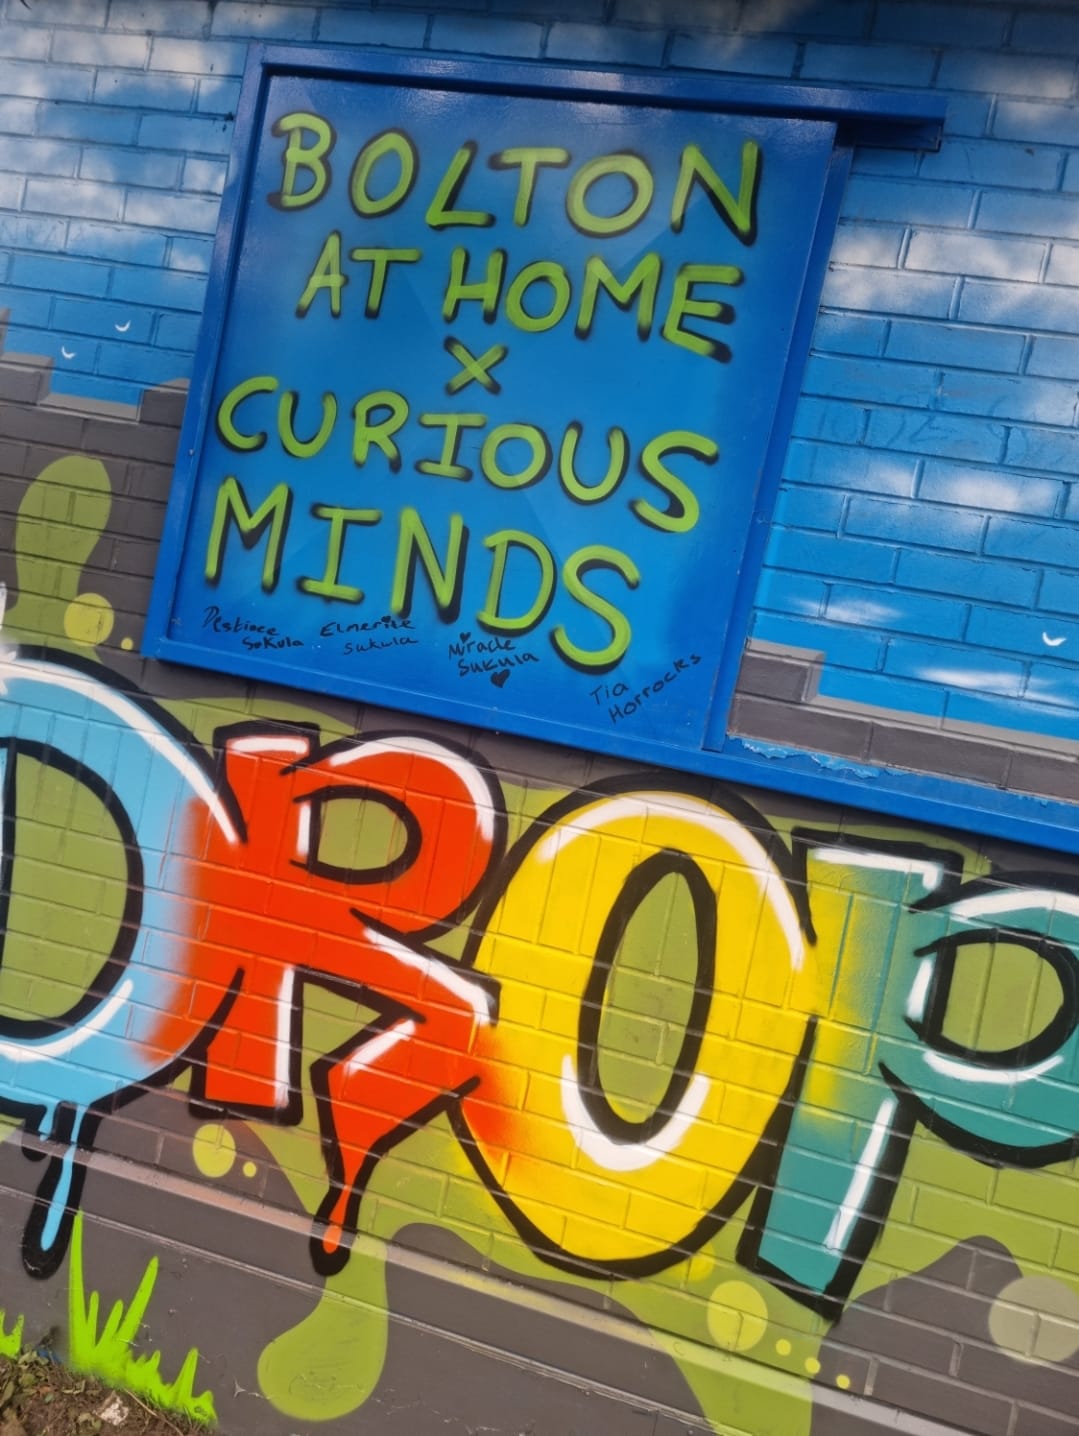 Image is a closeup of the Bolton@Home grafitti artwork. It is very colourful. A sign reads Bolton @ Home x Curious Minds